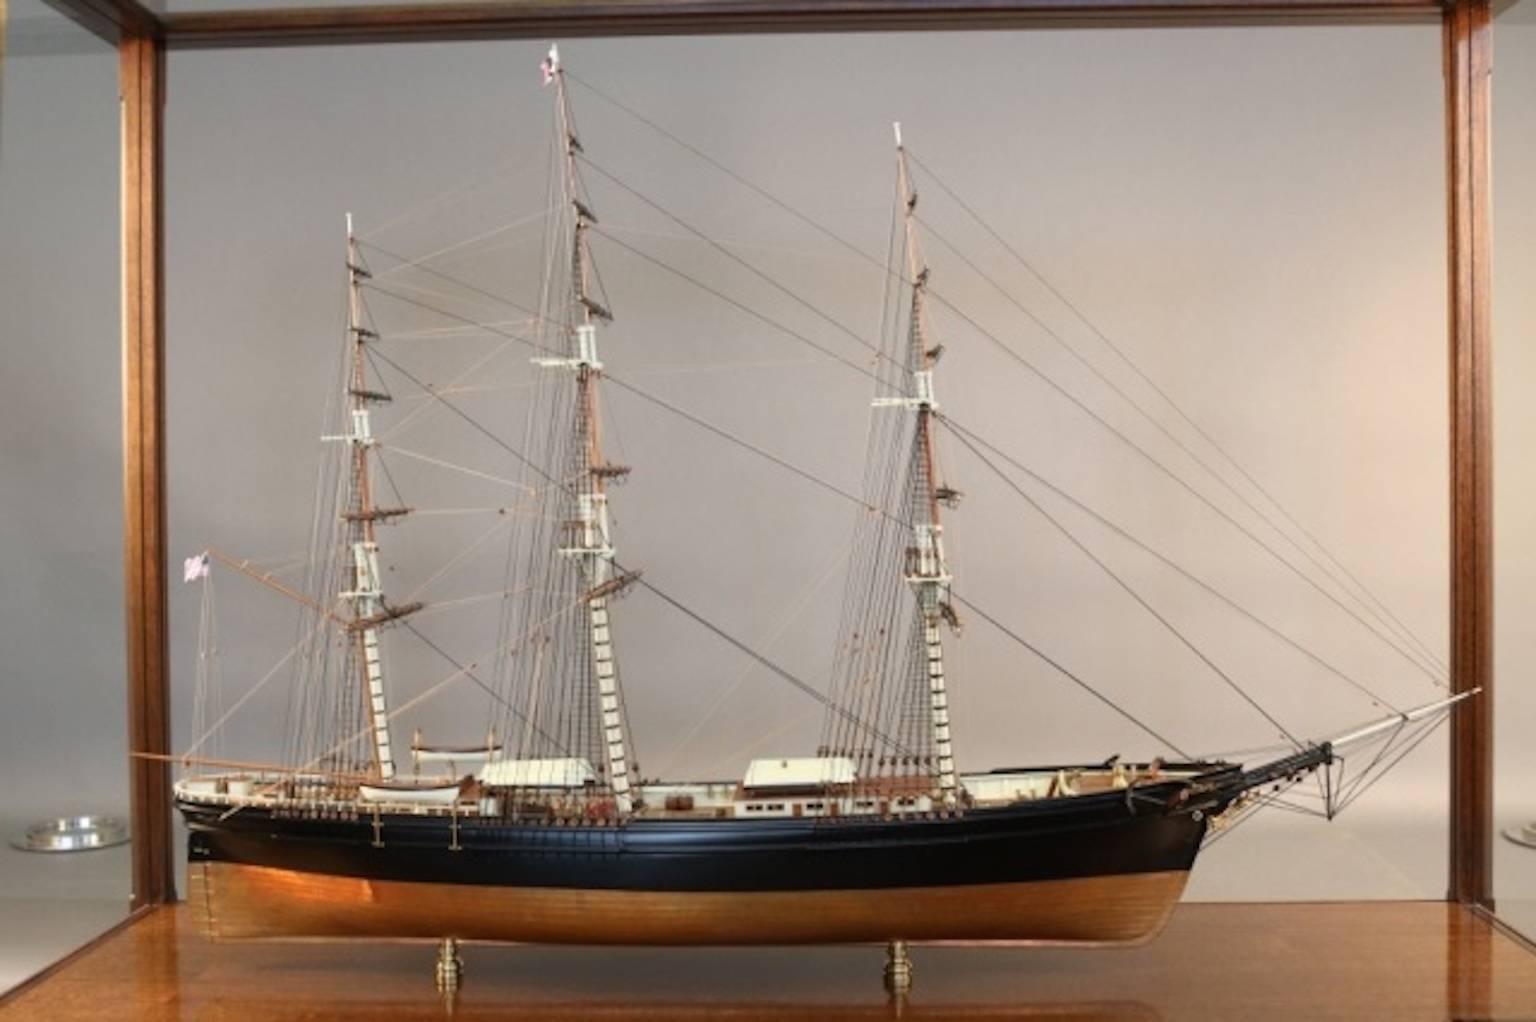 Highest quality model of the American clipper ship "Flying Cloud". Planked deck with expertly executed cabins, hatches, skylights, etc. Hull is copper sheathed below the waterline and painted black above. Intricately rigged with all